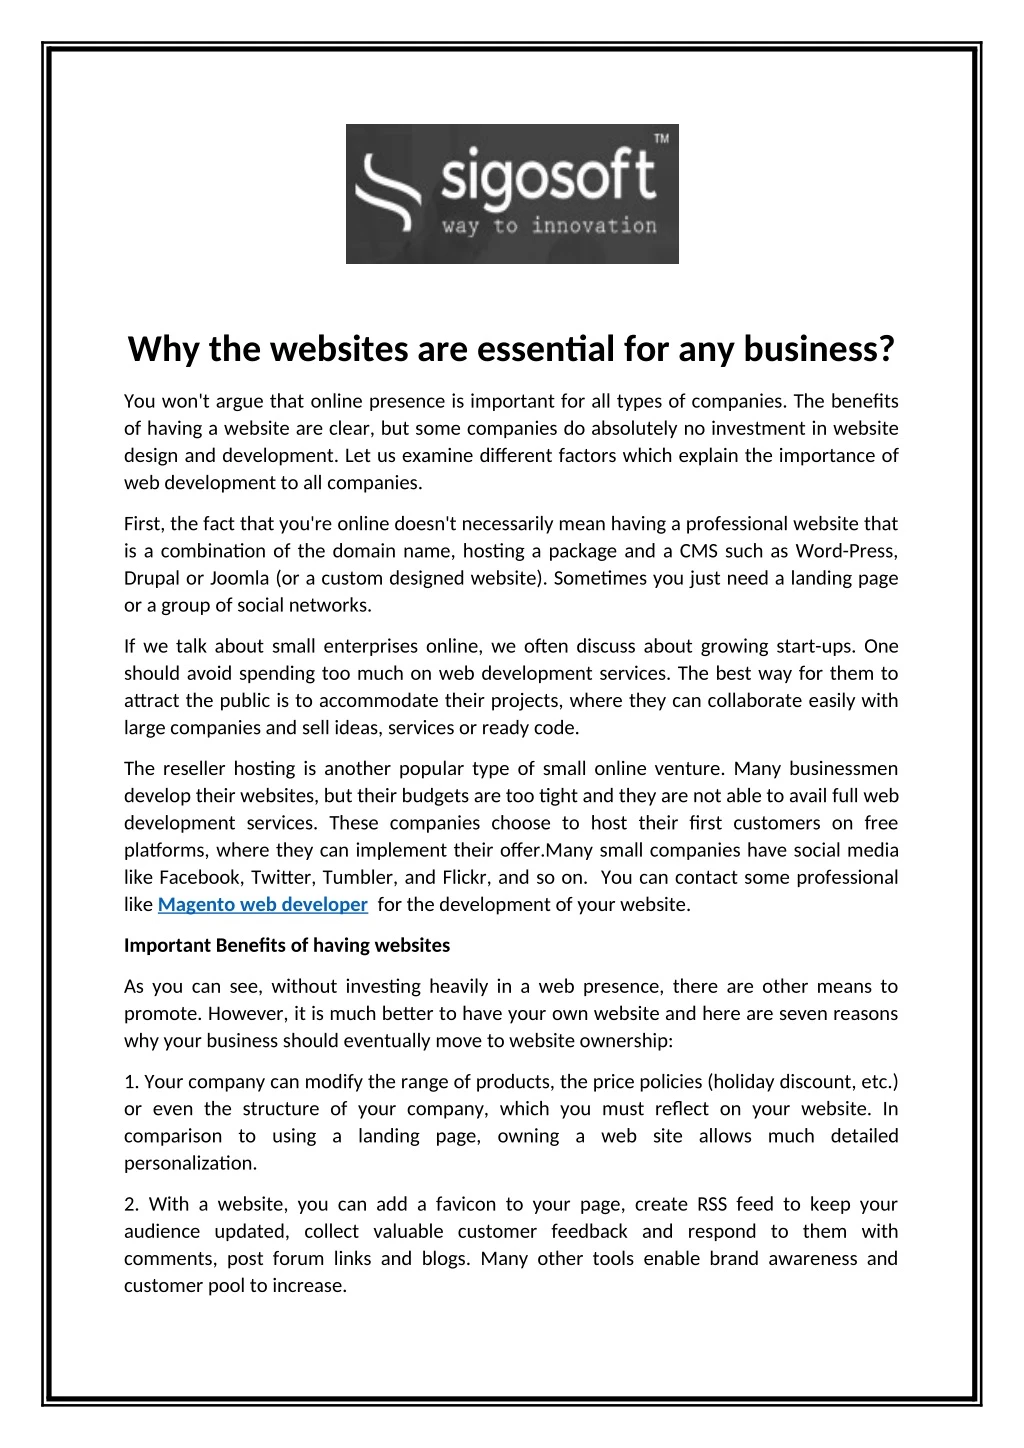 why the websites are essential for any business